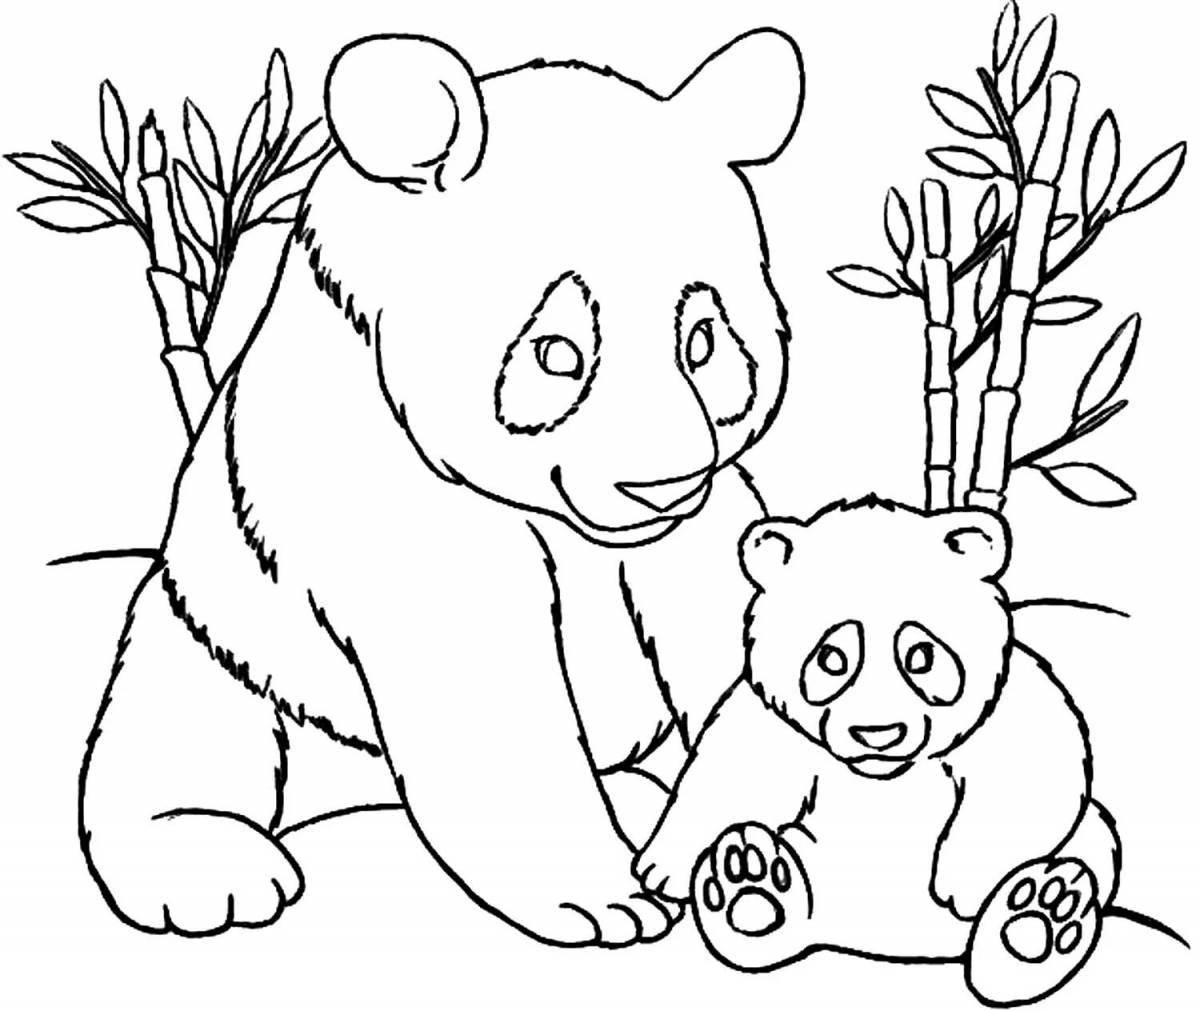 Adorable panda coloring pages for girls